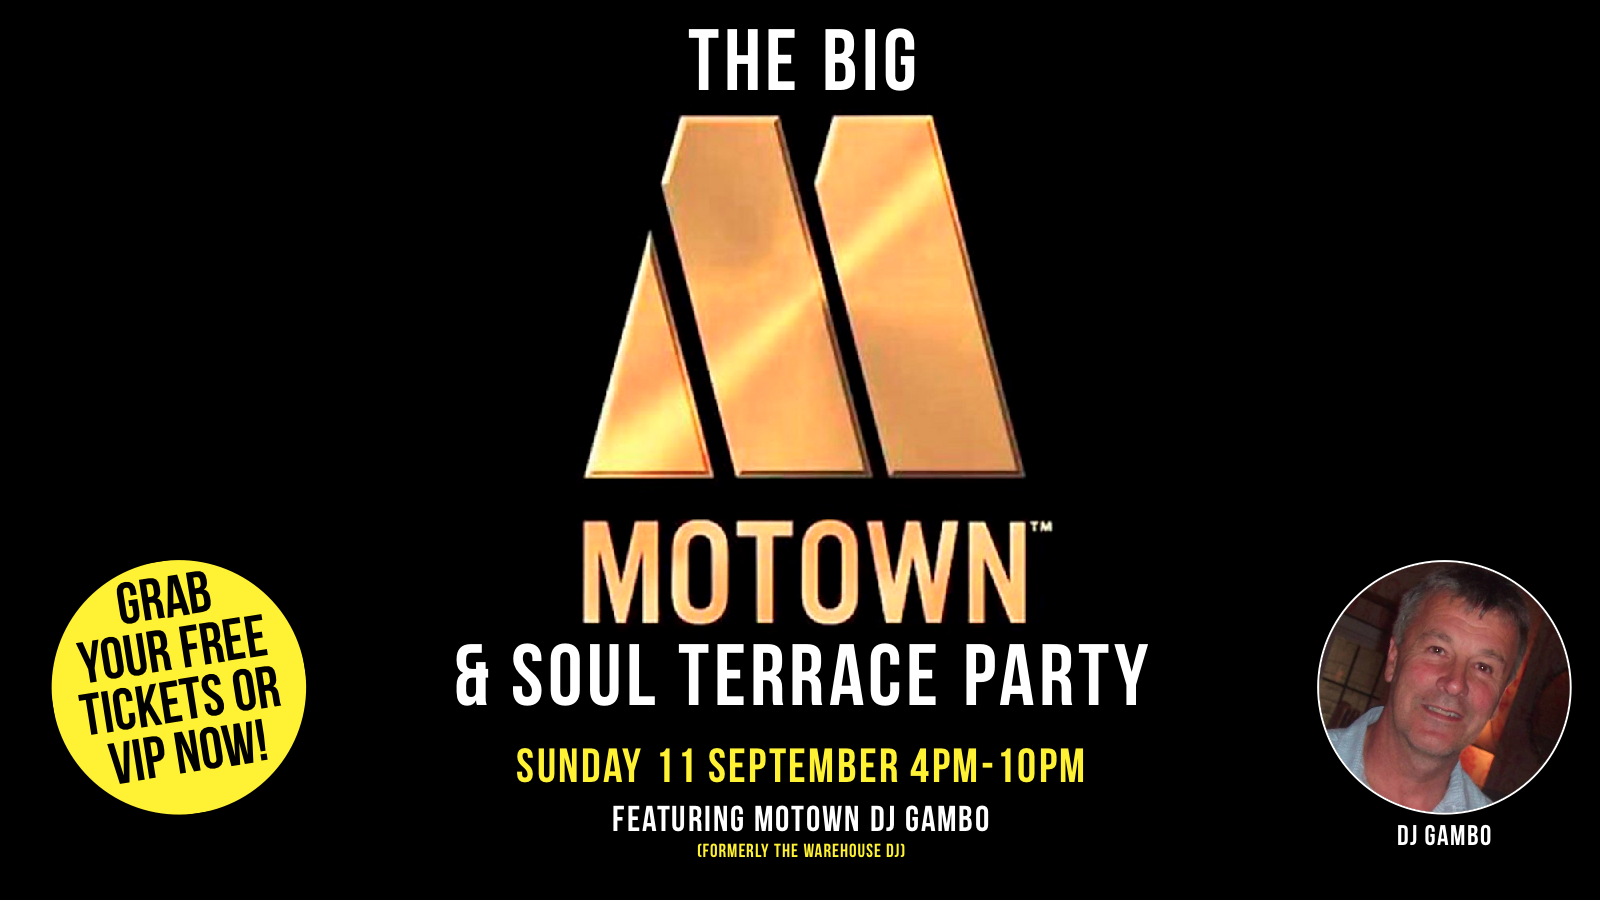 THE BIG MOTOWN & SOUL TERRACE PARTY – GRAB YOUR FREE TICKETS at Flamingo Terrace Bar & Roof Garden – Live DJ Gambo